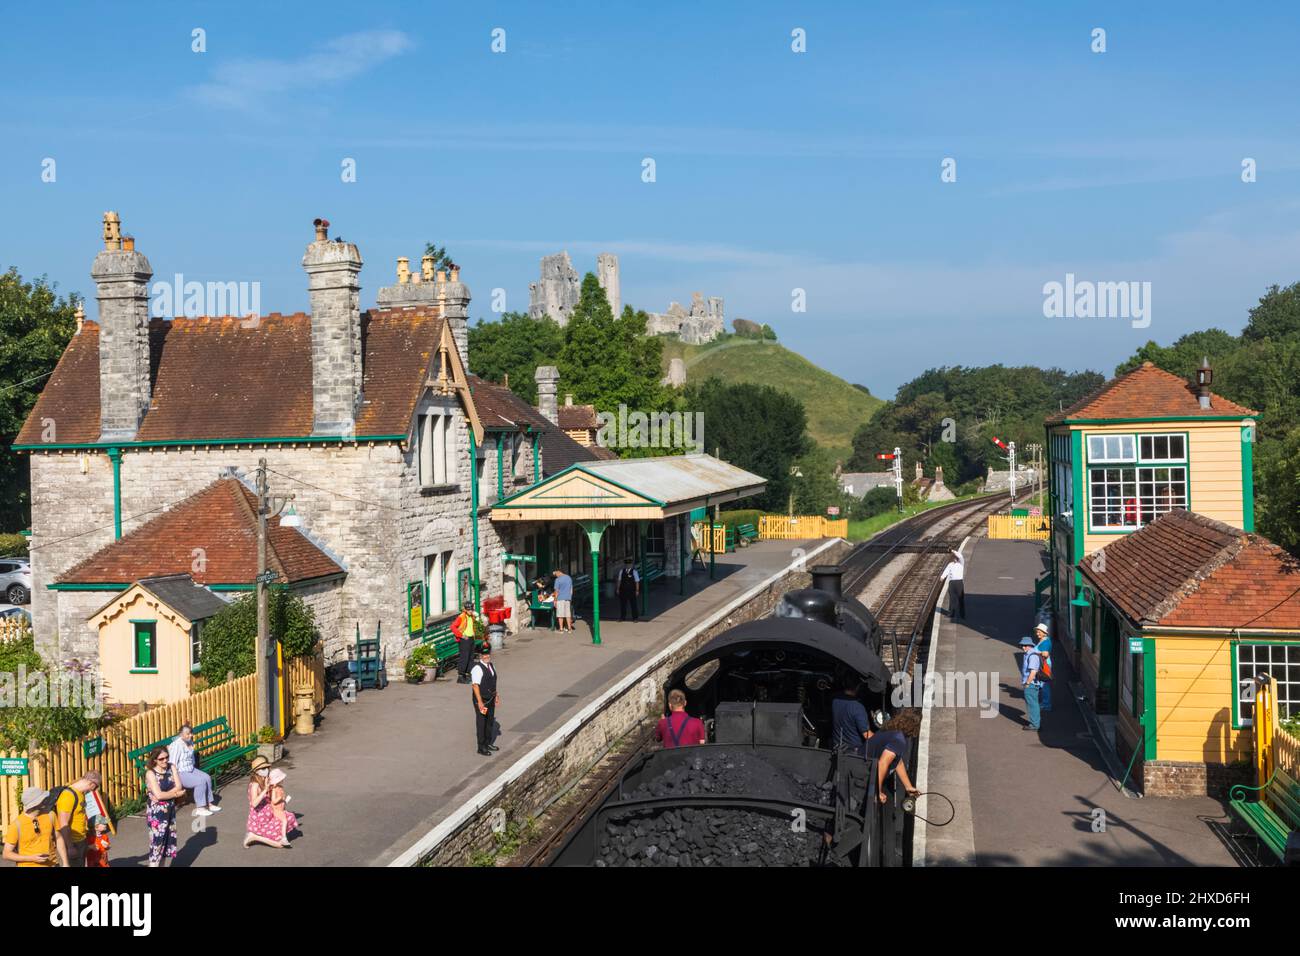 England, Dorset, Isle of Purbeck, Corfe Castle, The Historic Railway Station and Steam Train Stock Photo